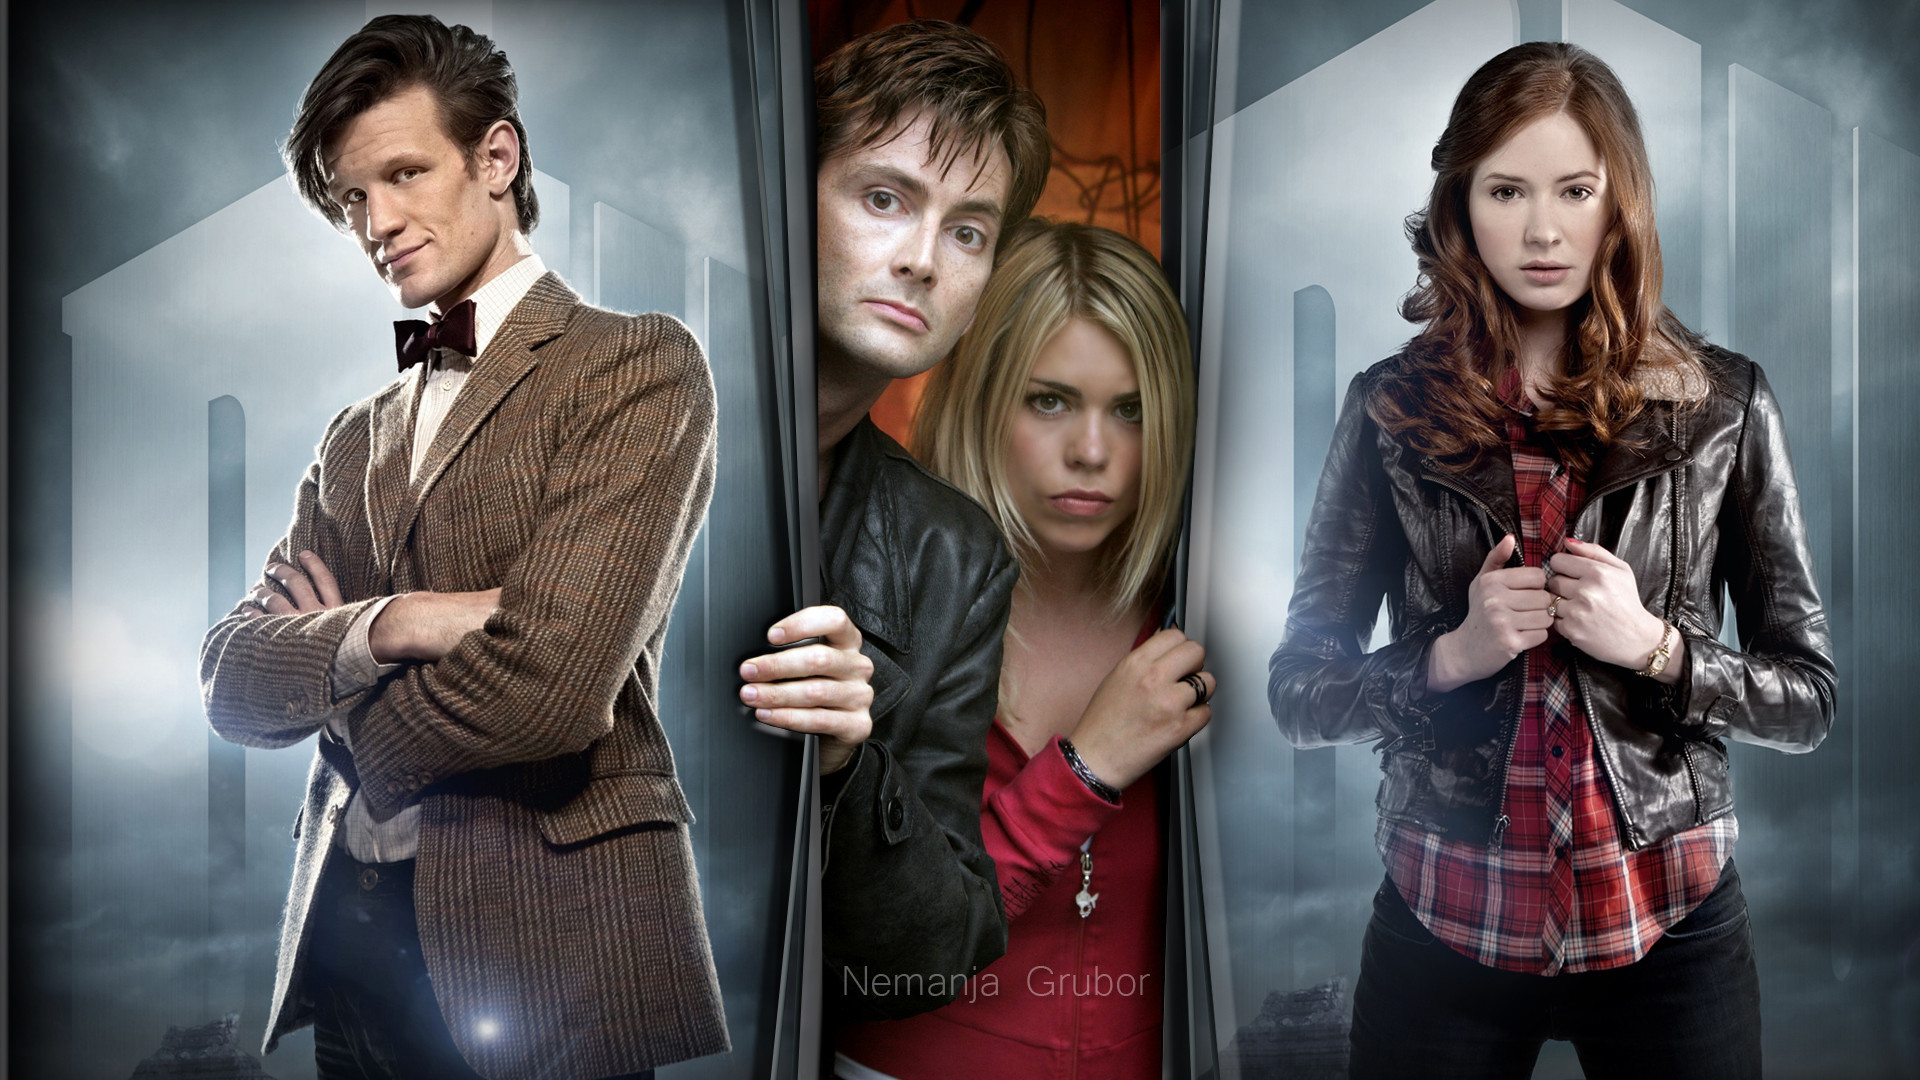 1920x1080 Free Doctor Who Wallpaper Main characters.